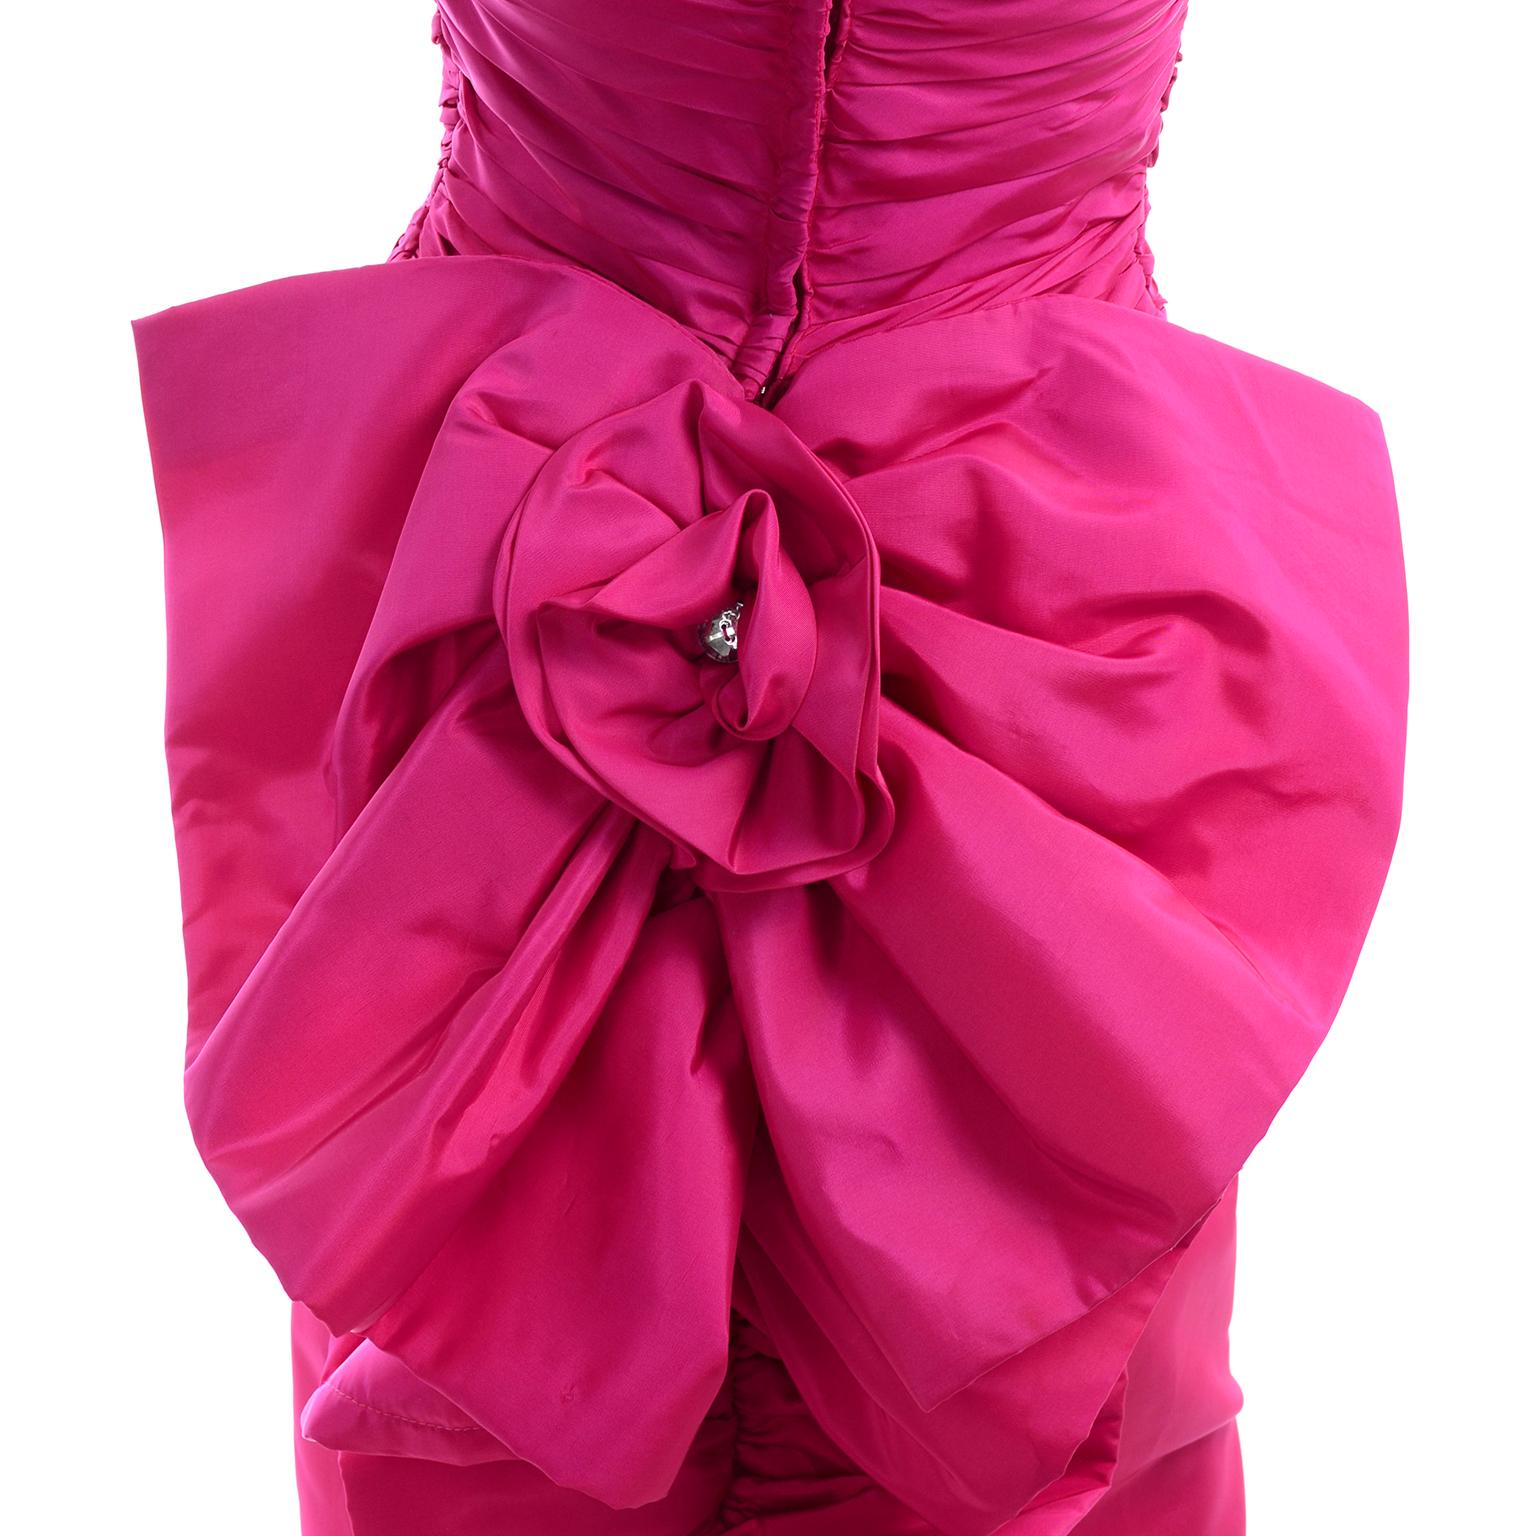 1980s Bright Pink Strapless Vintage Evening Dress With Giant Bow & Ruching 6